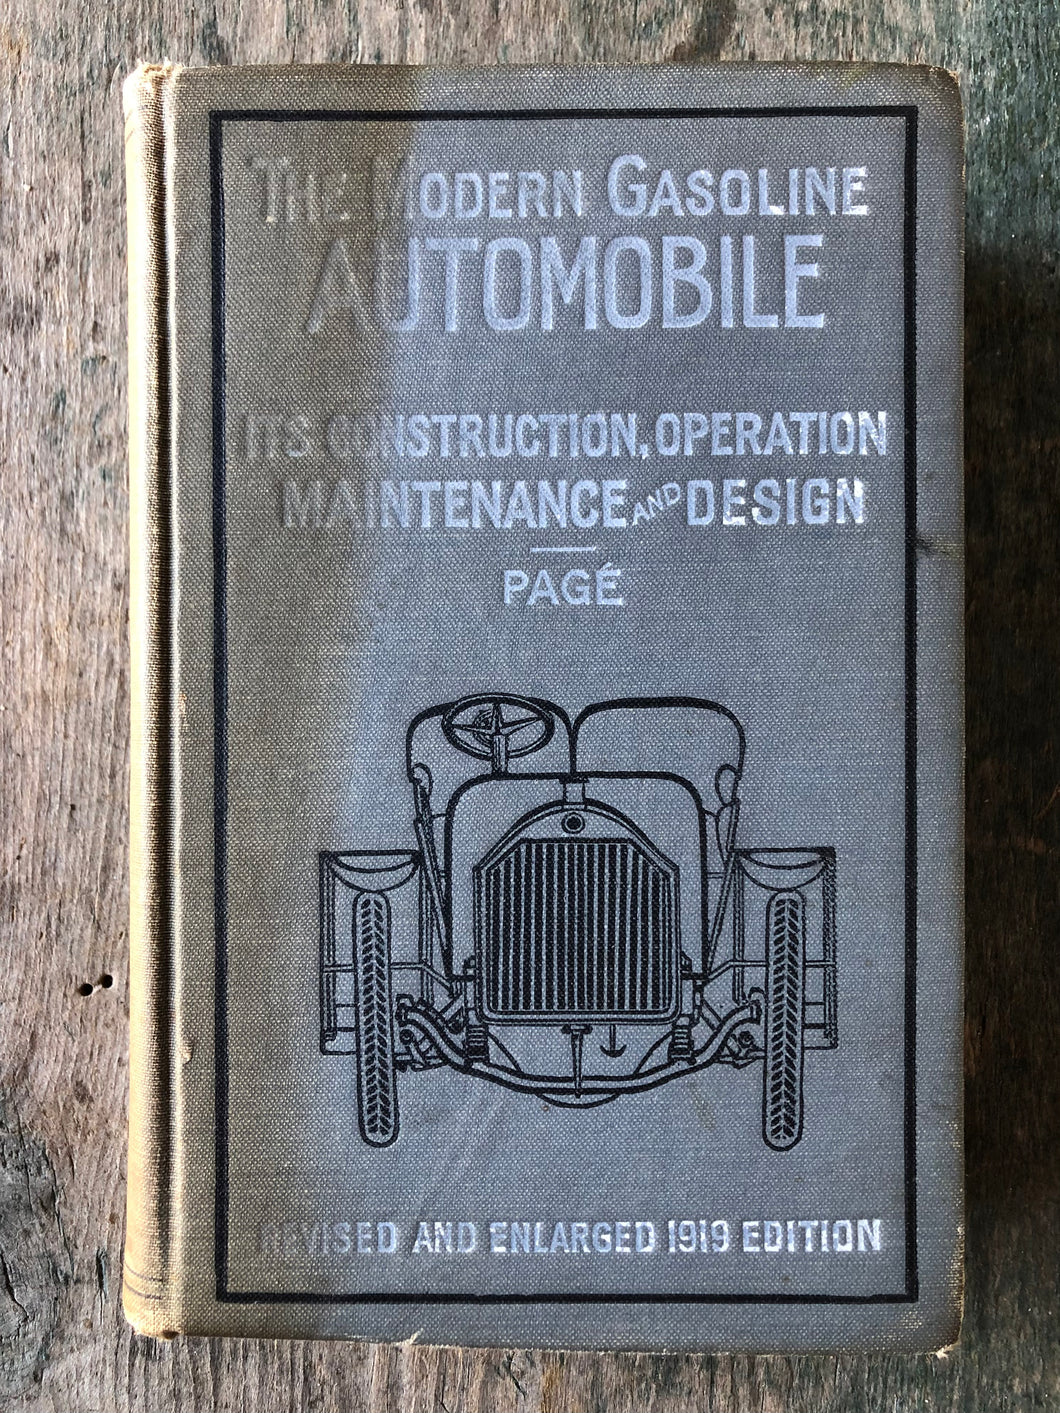 The Modern Gasoline Automobile: Its Design, Construction, Operation and Maintenance by Victor W. Page